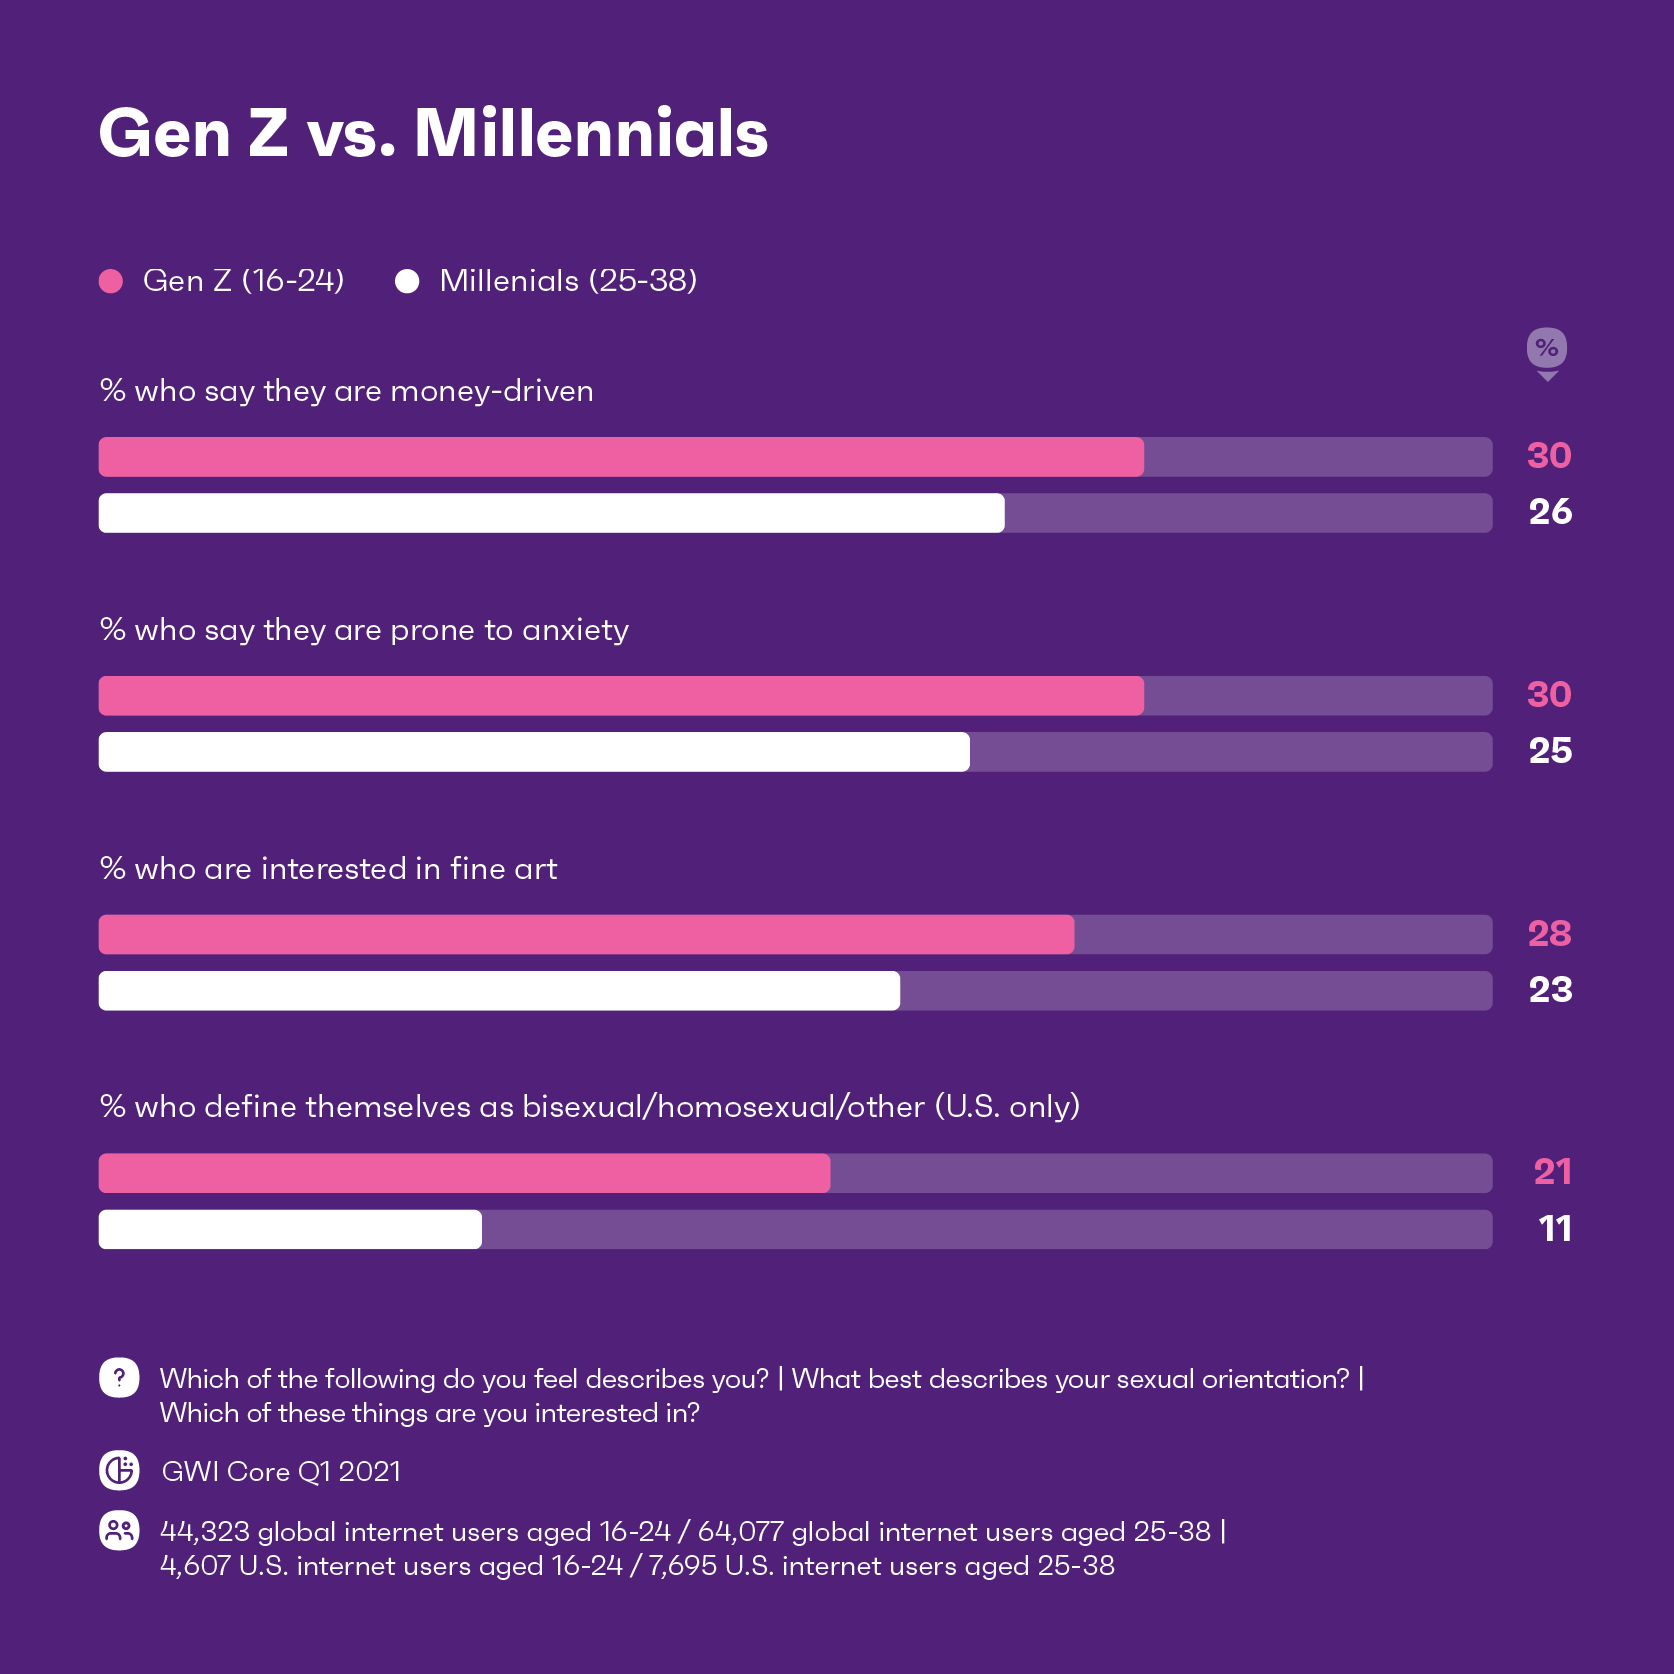 chart showing the key differences between Gen Z and millennials